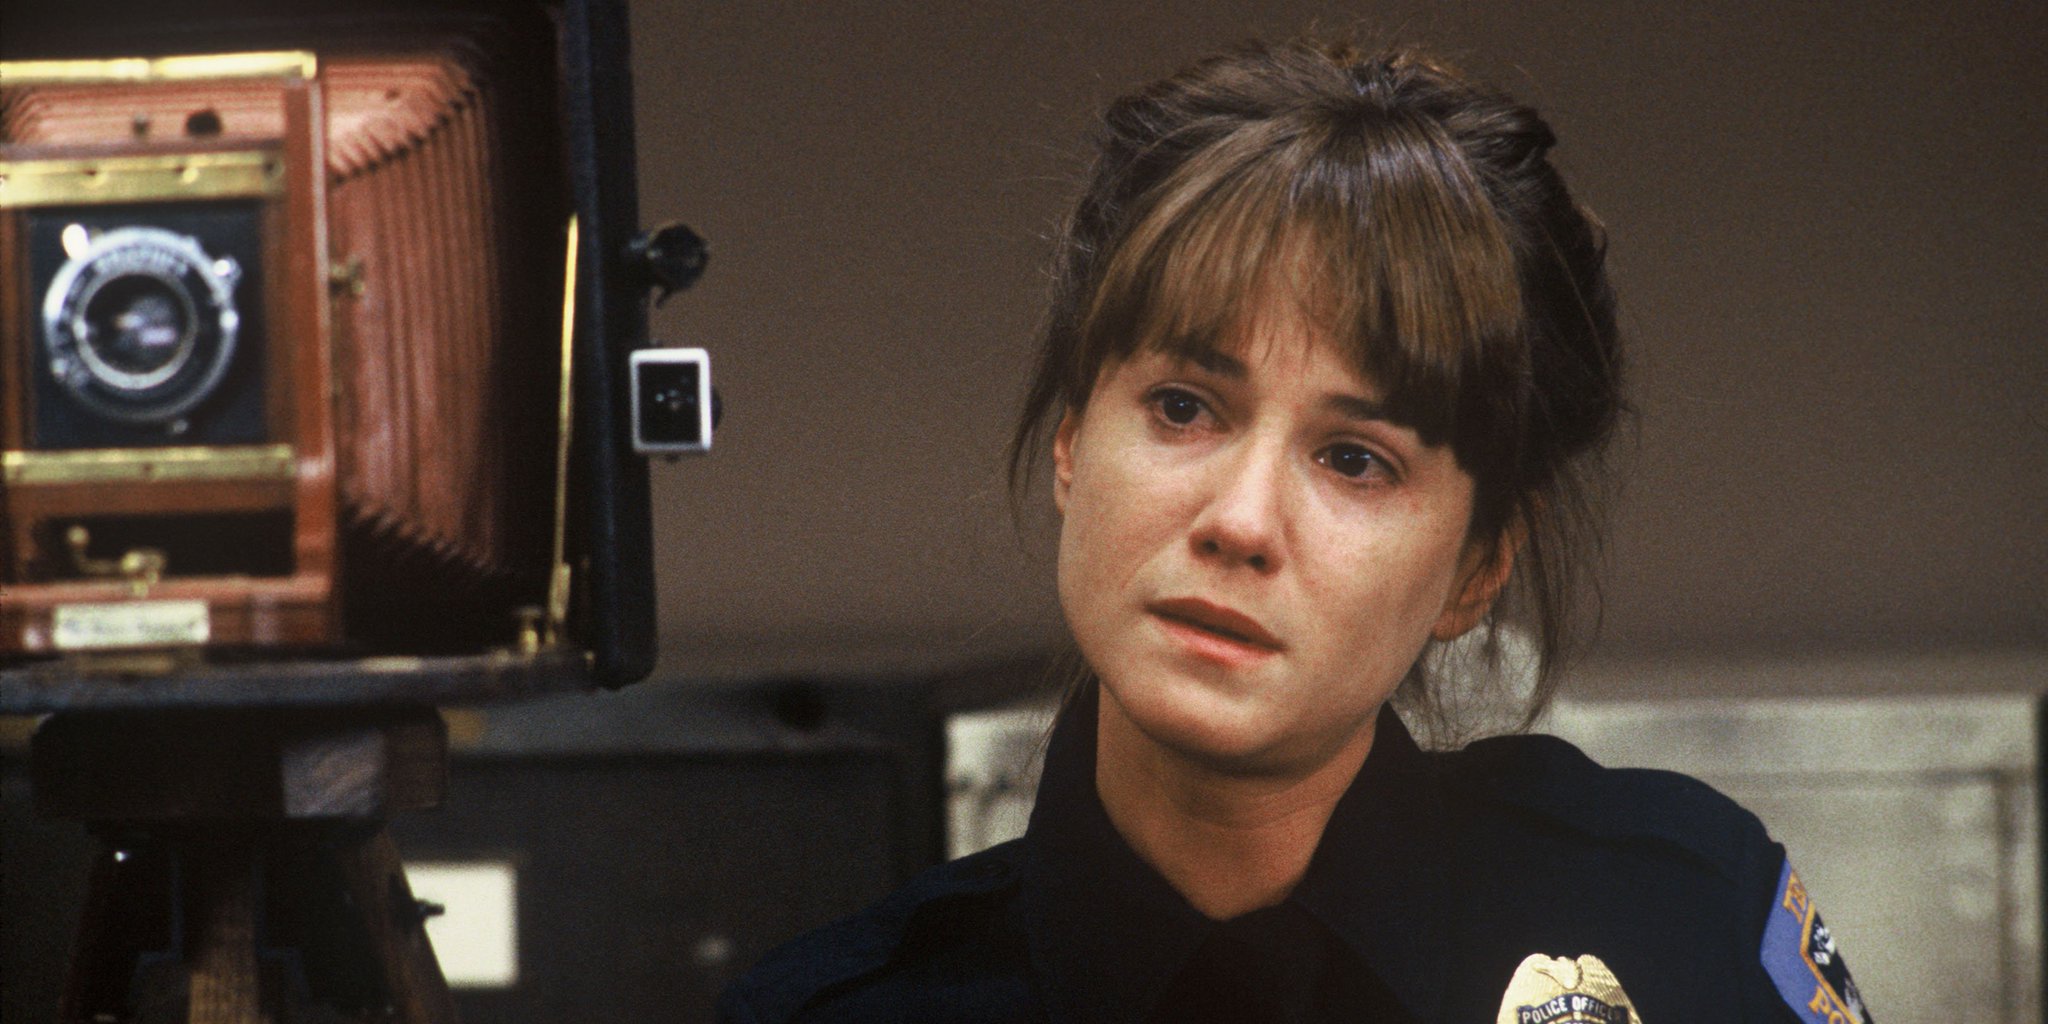 Have you wished Holly Hunter a happy birthday? We gotta do that, honey! 